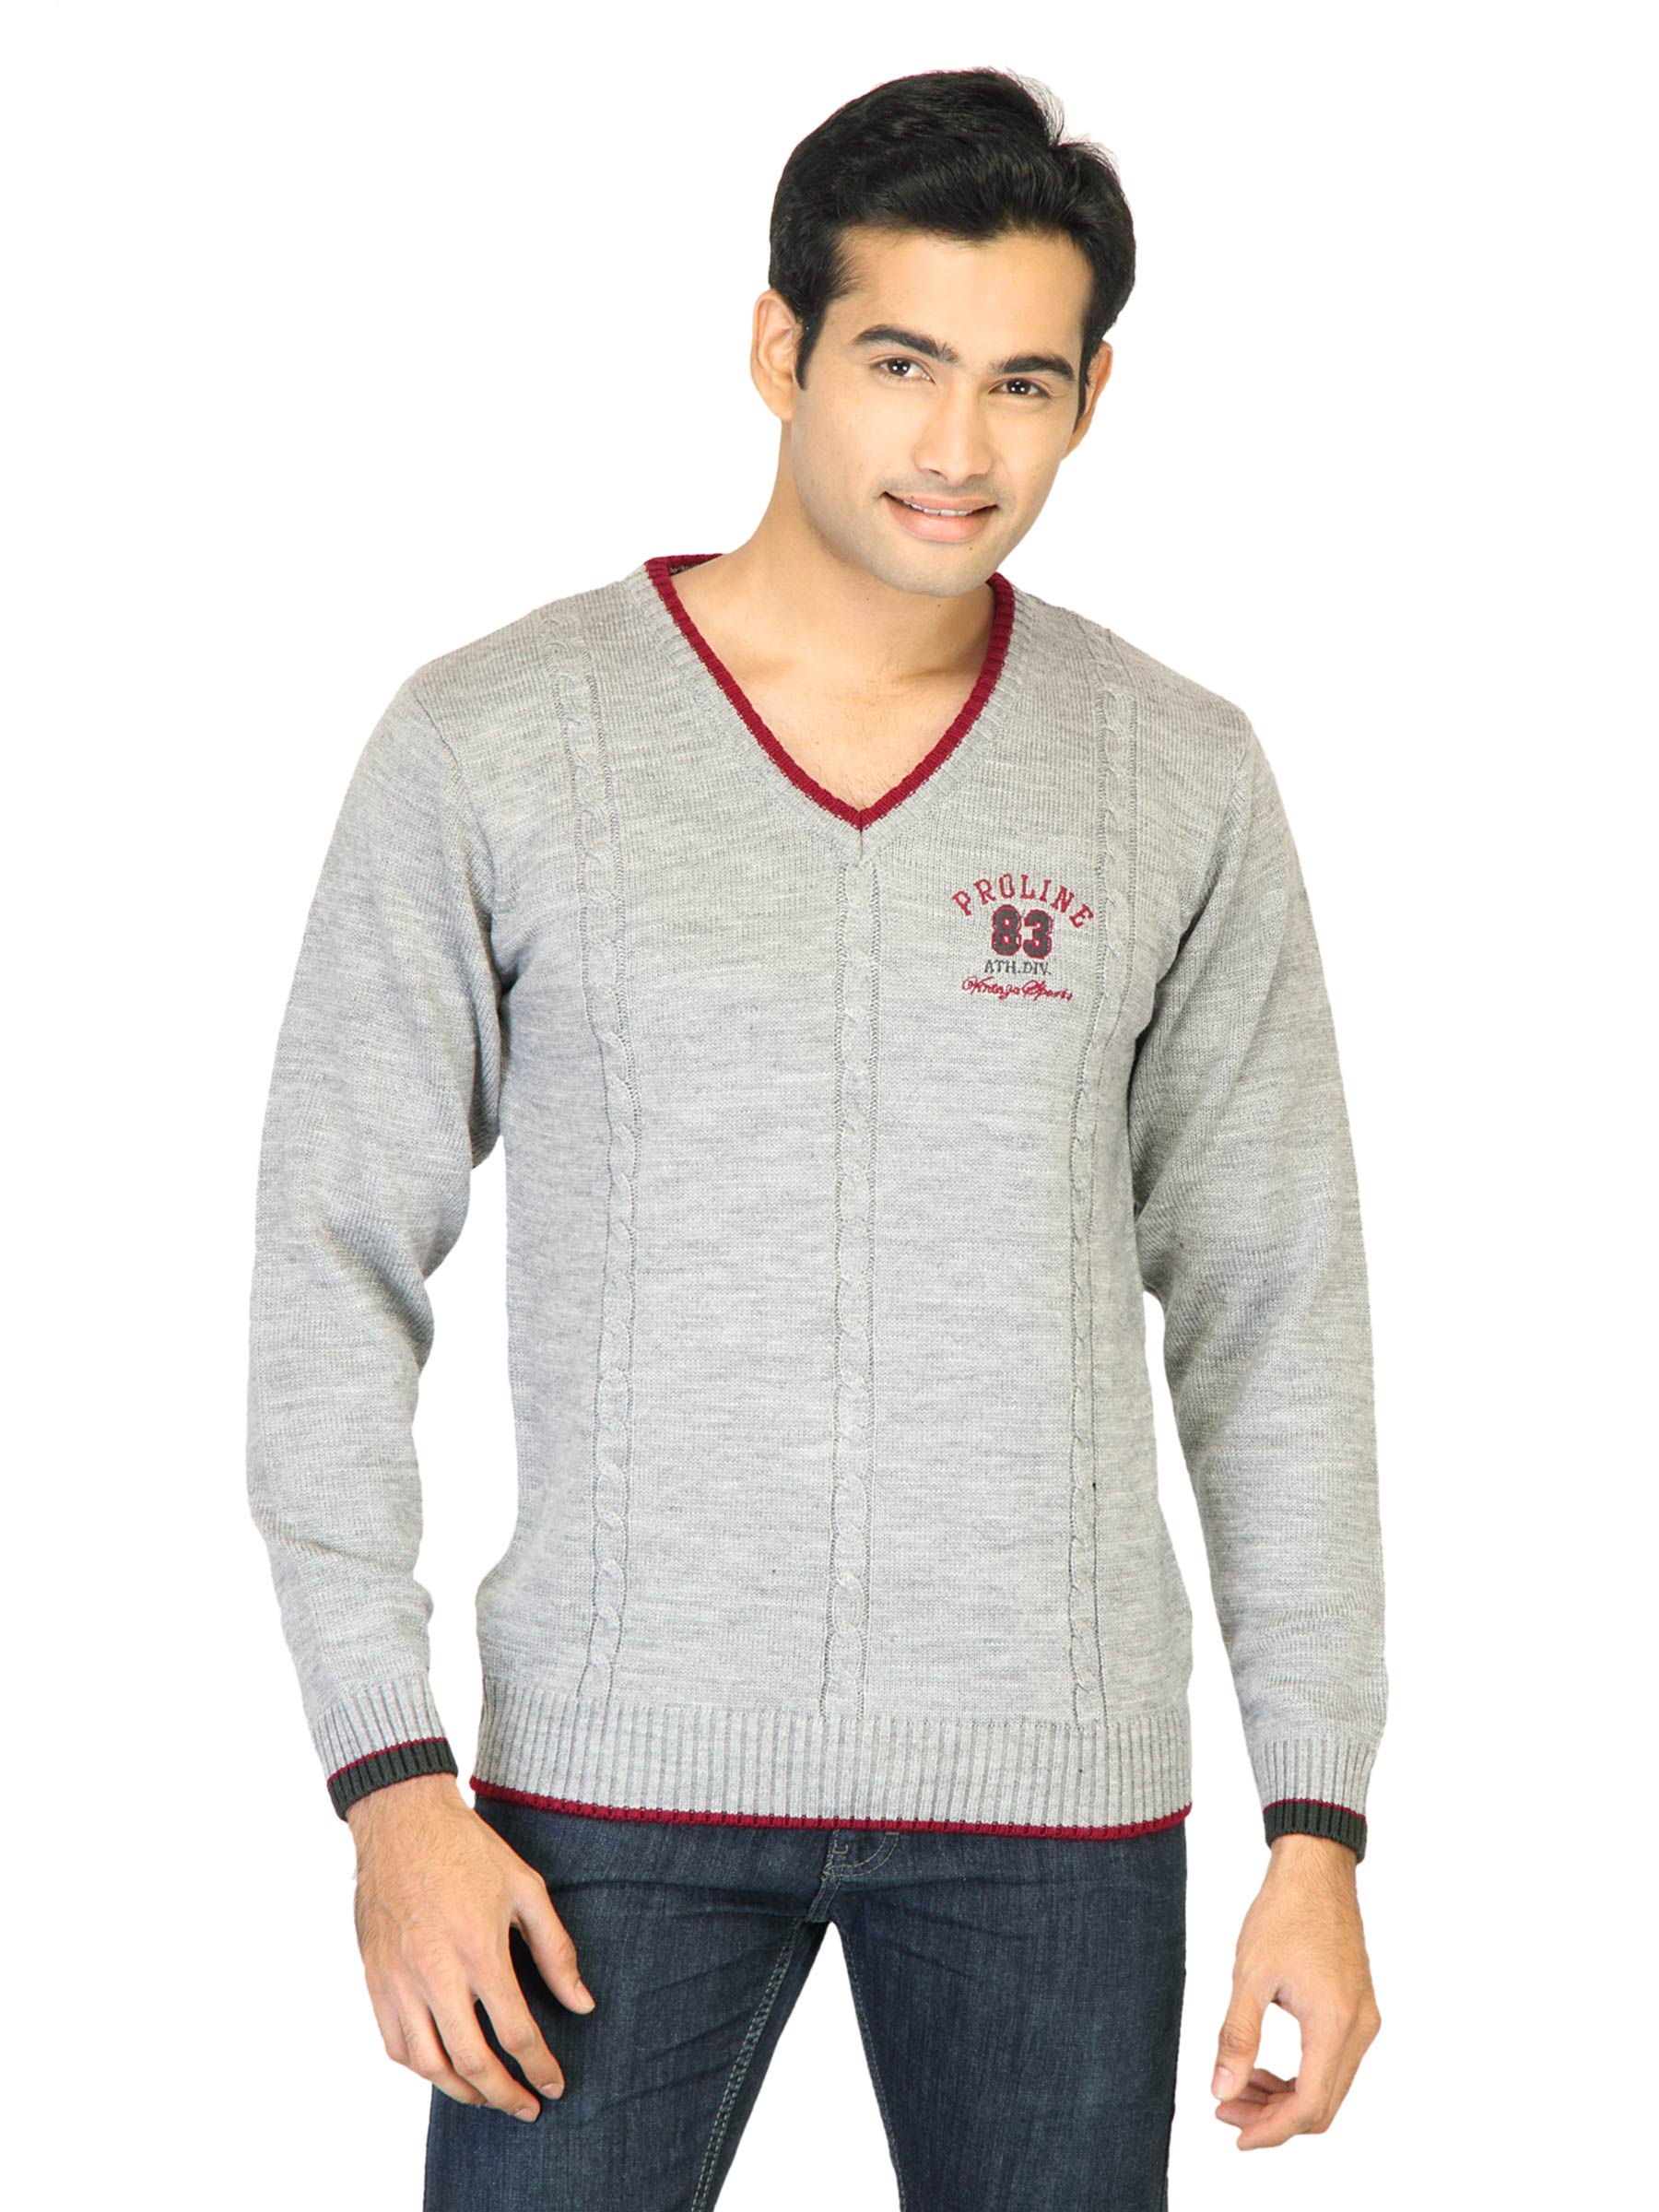 Proline Grey Sweater with Knitted Stripes